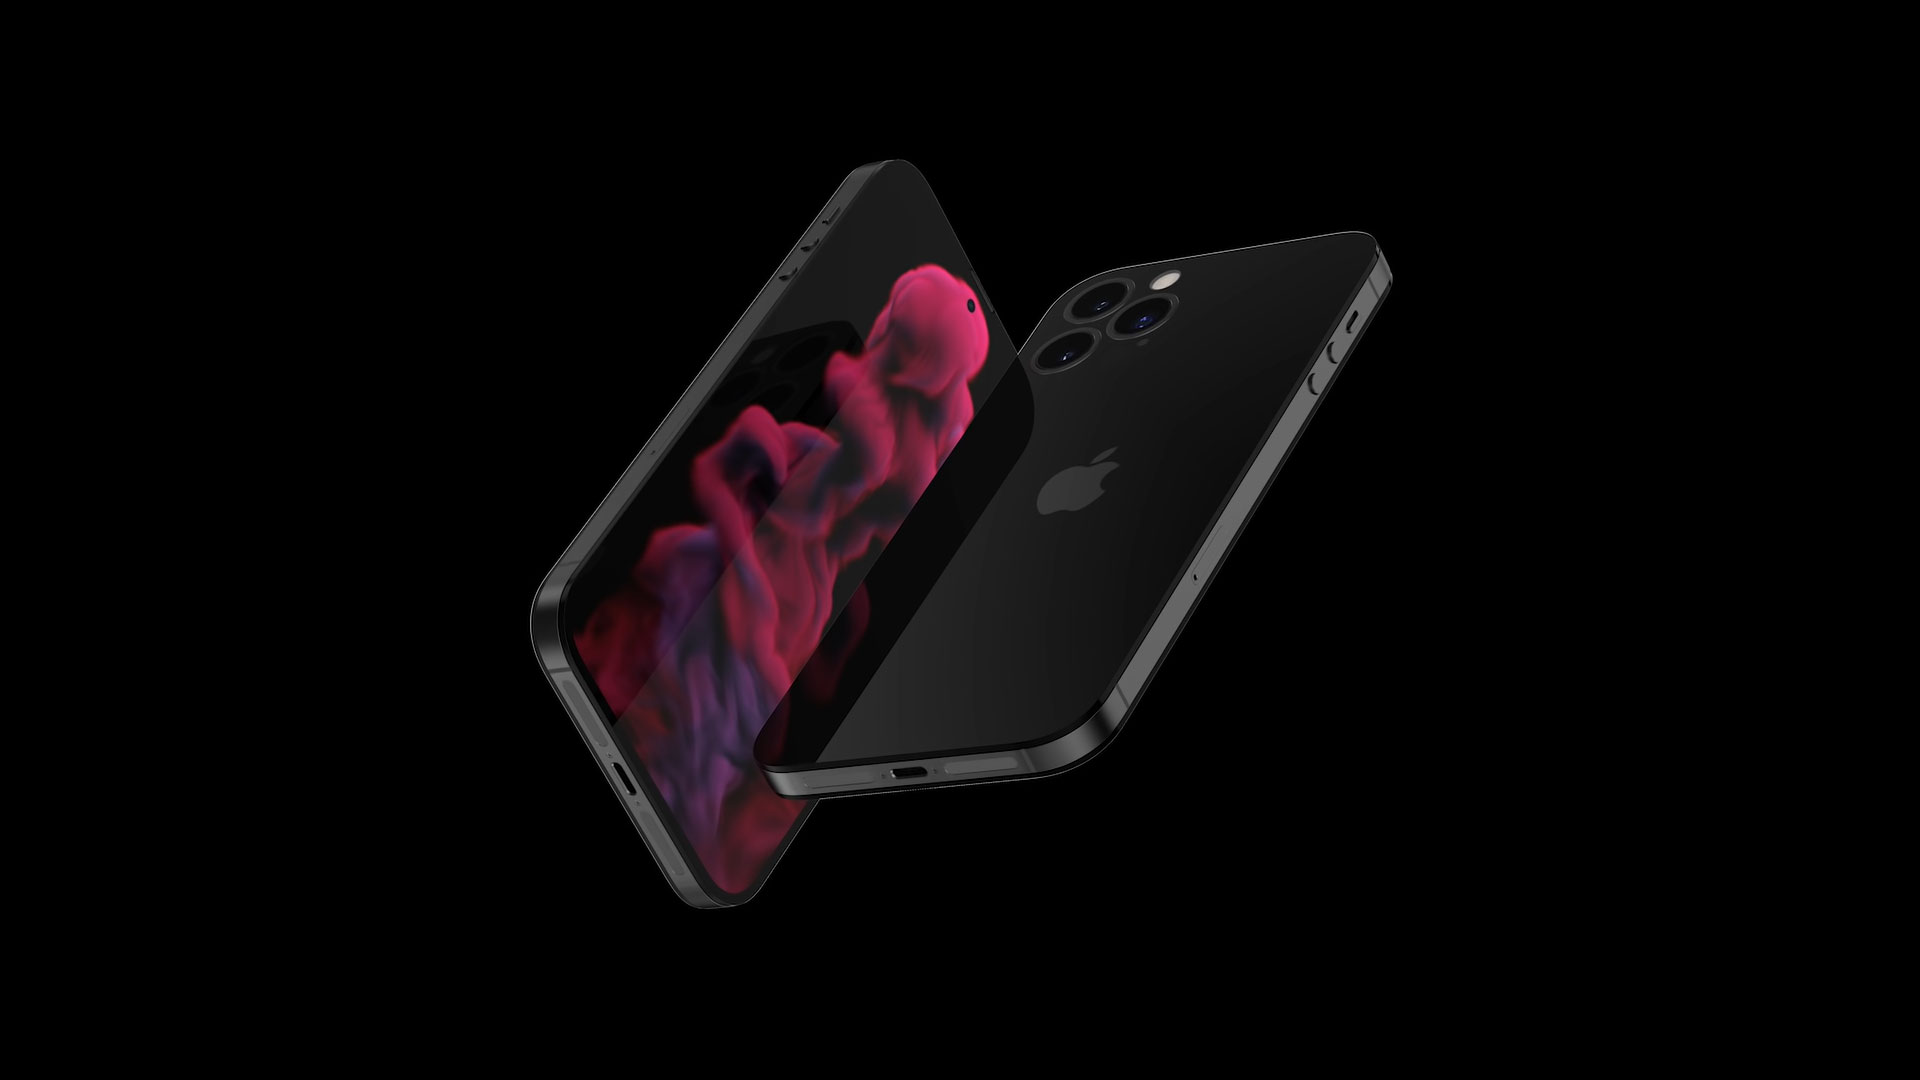 Latest iPhone 14 Pro Renders Show The Pill And Hole Punch Design To Be The Only Major Design Change